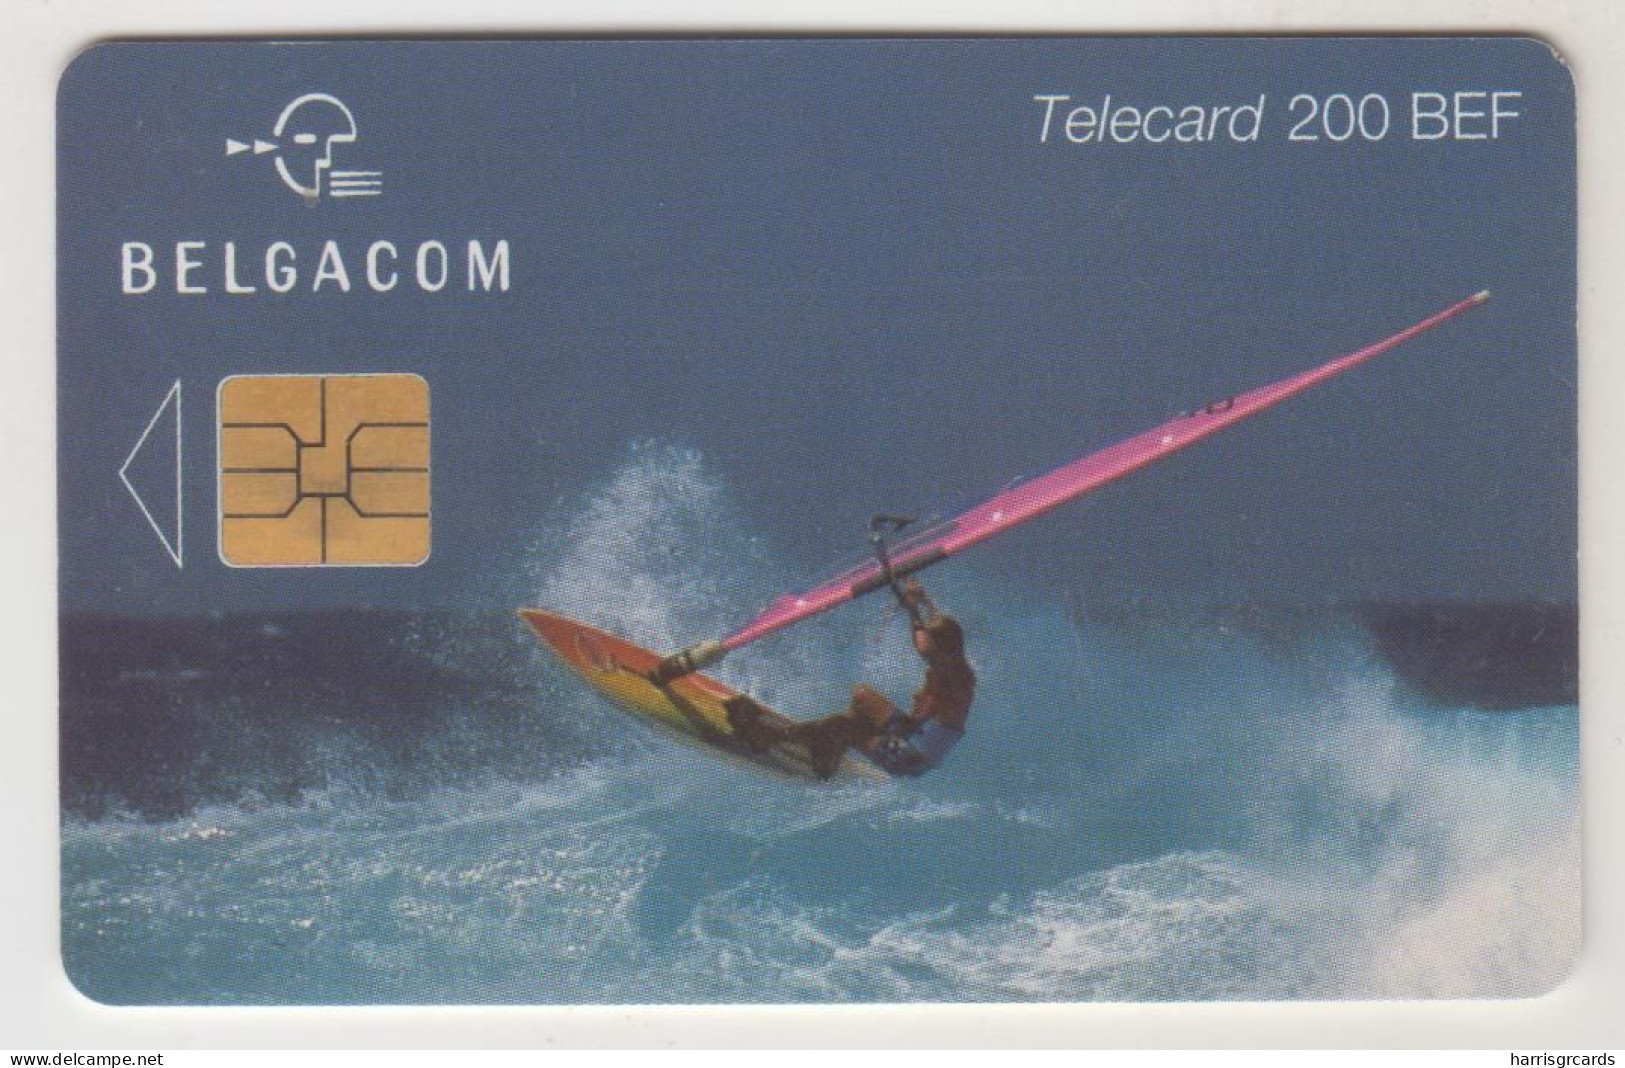 BELGIUM - Surfer, 200 BEF, Tirage 150.000, Used - With Chip